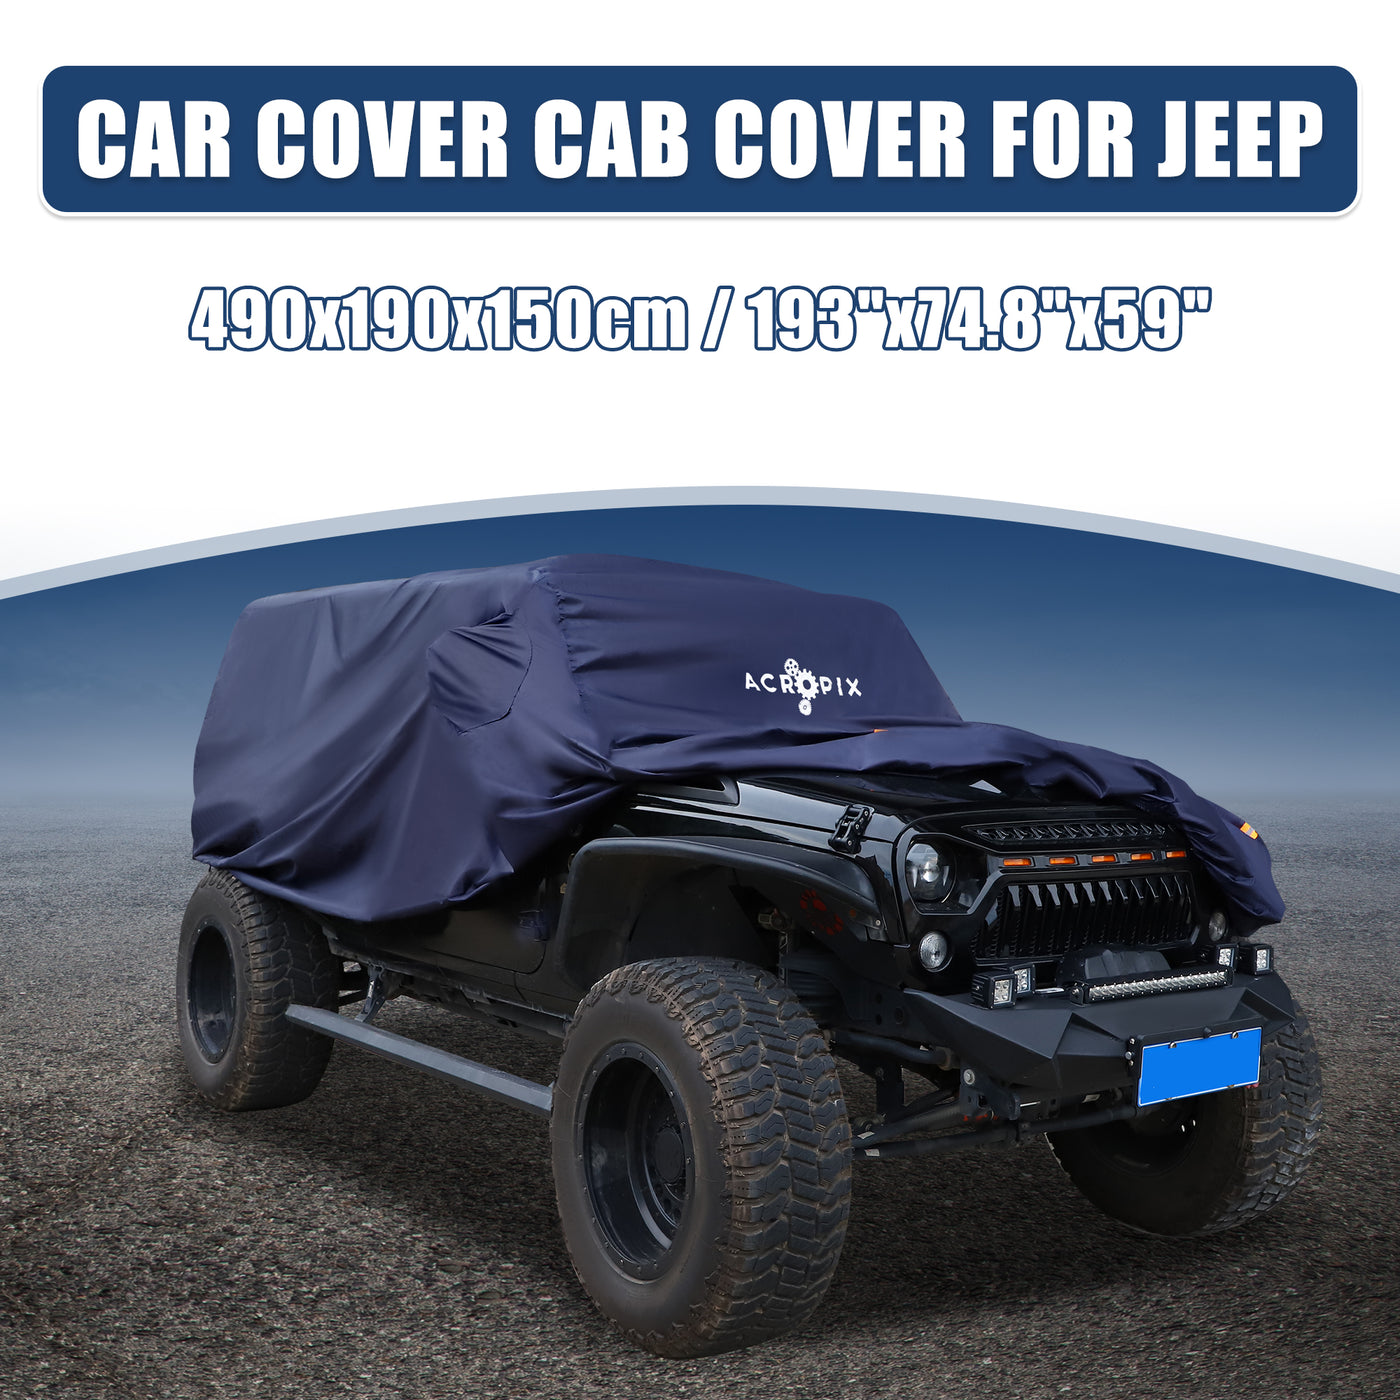 ACROPIX SUV Car Cover Fit for Jeep Wrangler JK JL 4 Door 2007-2017 with Driver Door Snow Rain All Weather Protection - Pack of 1 Navy Blue